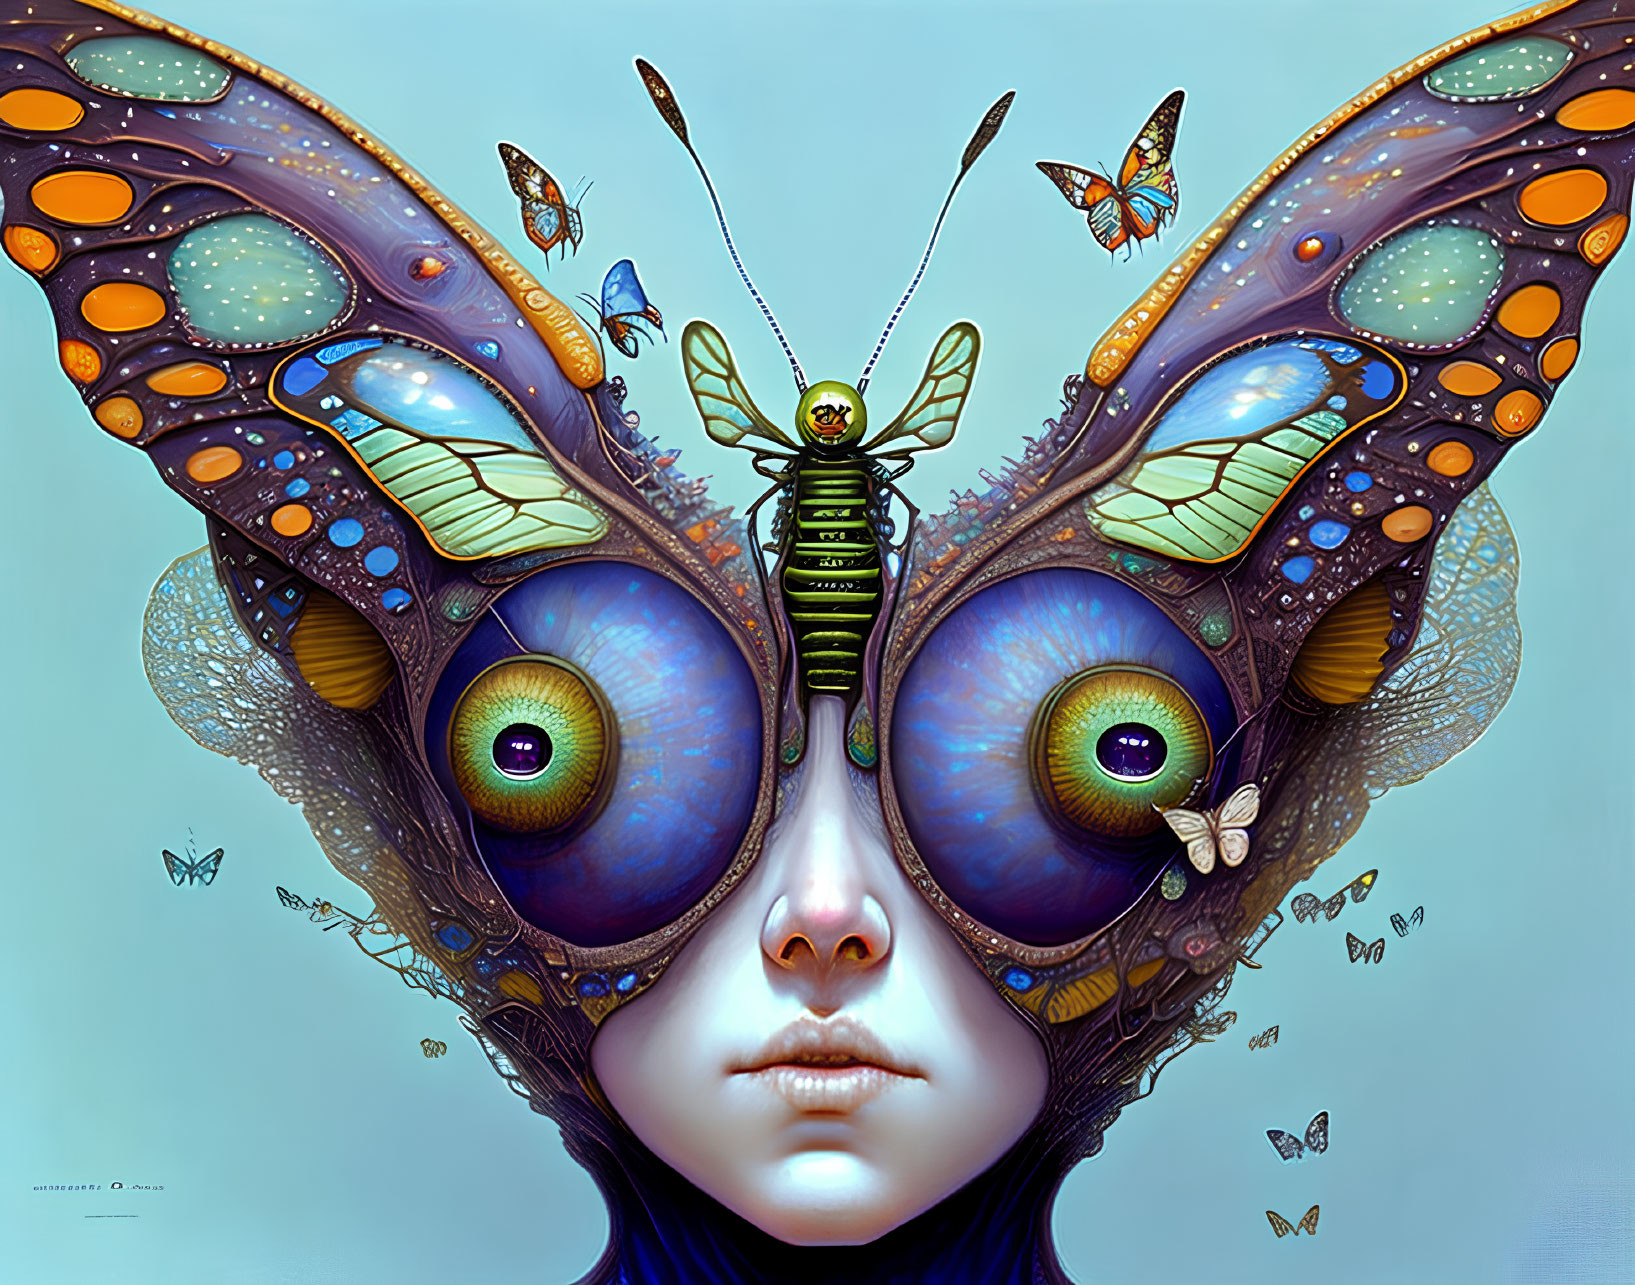 Surreal portrait with butterfly eyes and caterpillar body